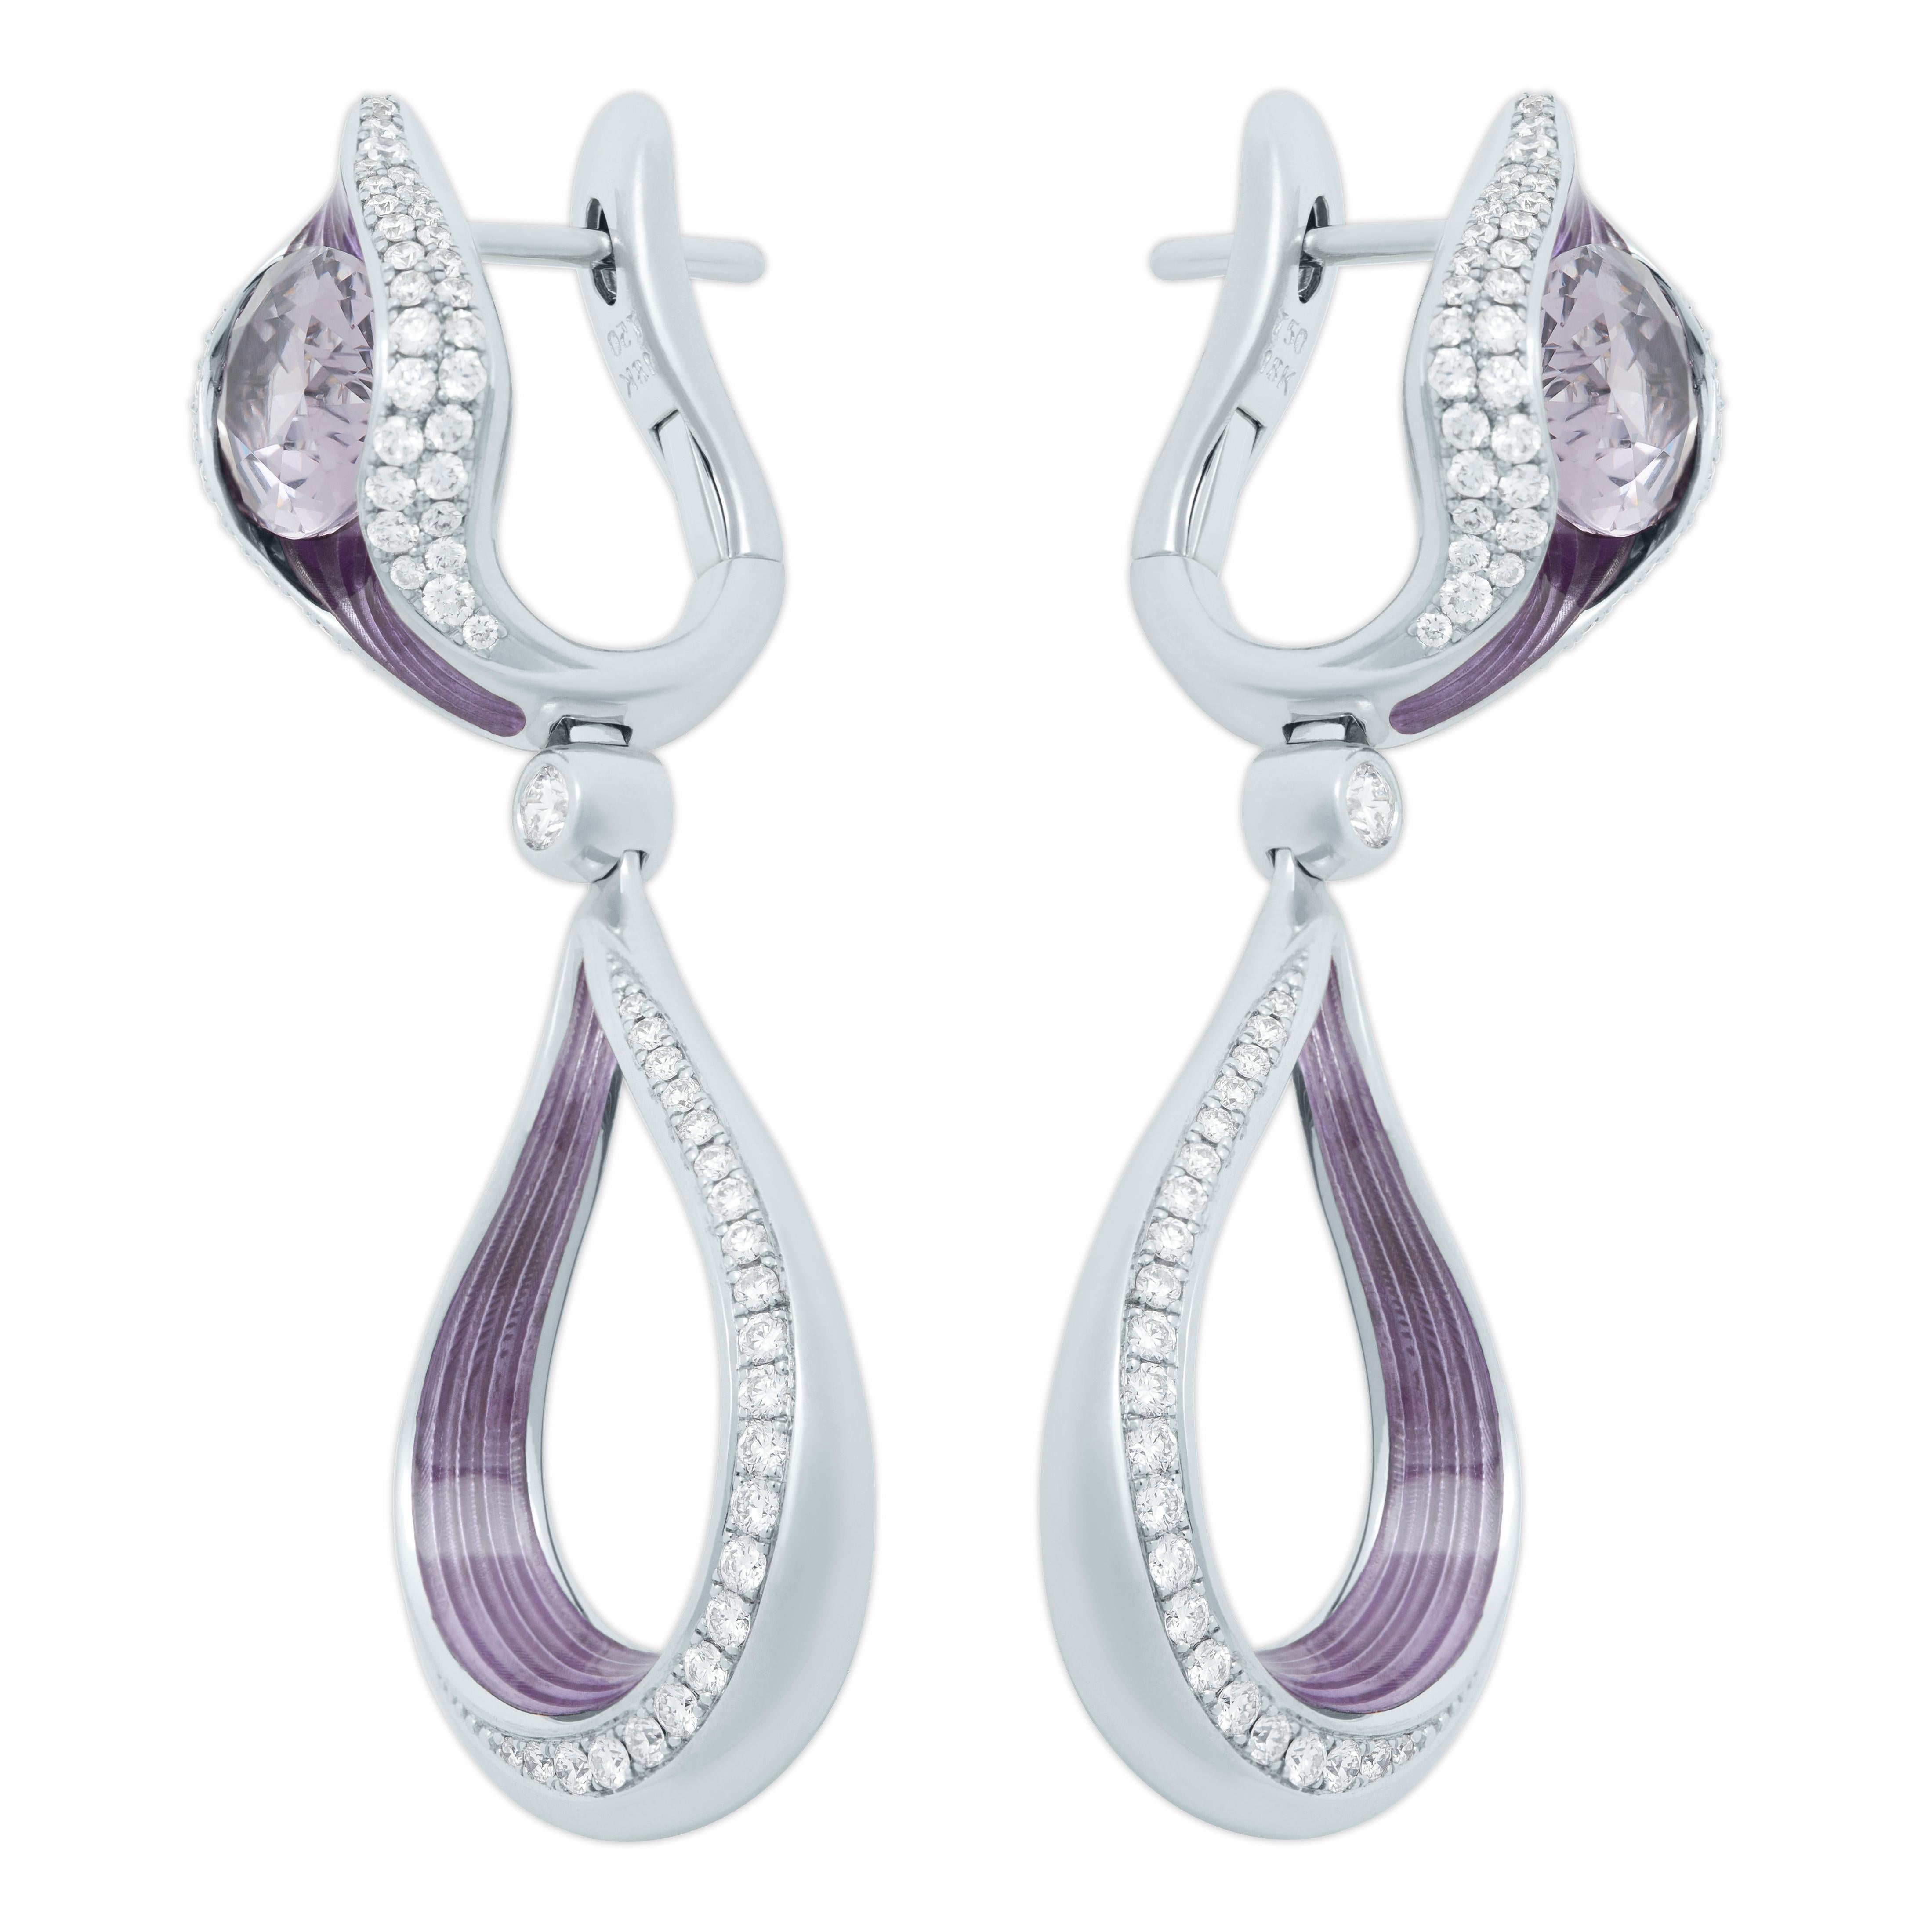 Spinel 4.72 Carat Diamonds Enamel 18 Karat White Gold Melted Colors Earrings
Introducing our new Earrings from so popular Melted Colors Collection. This collection is filled with all the colors of the rainbow. All stones are perfectly matched in